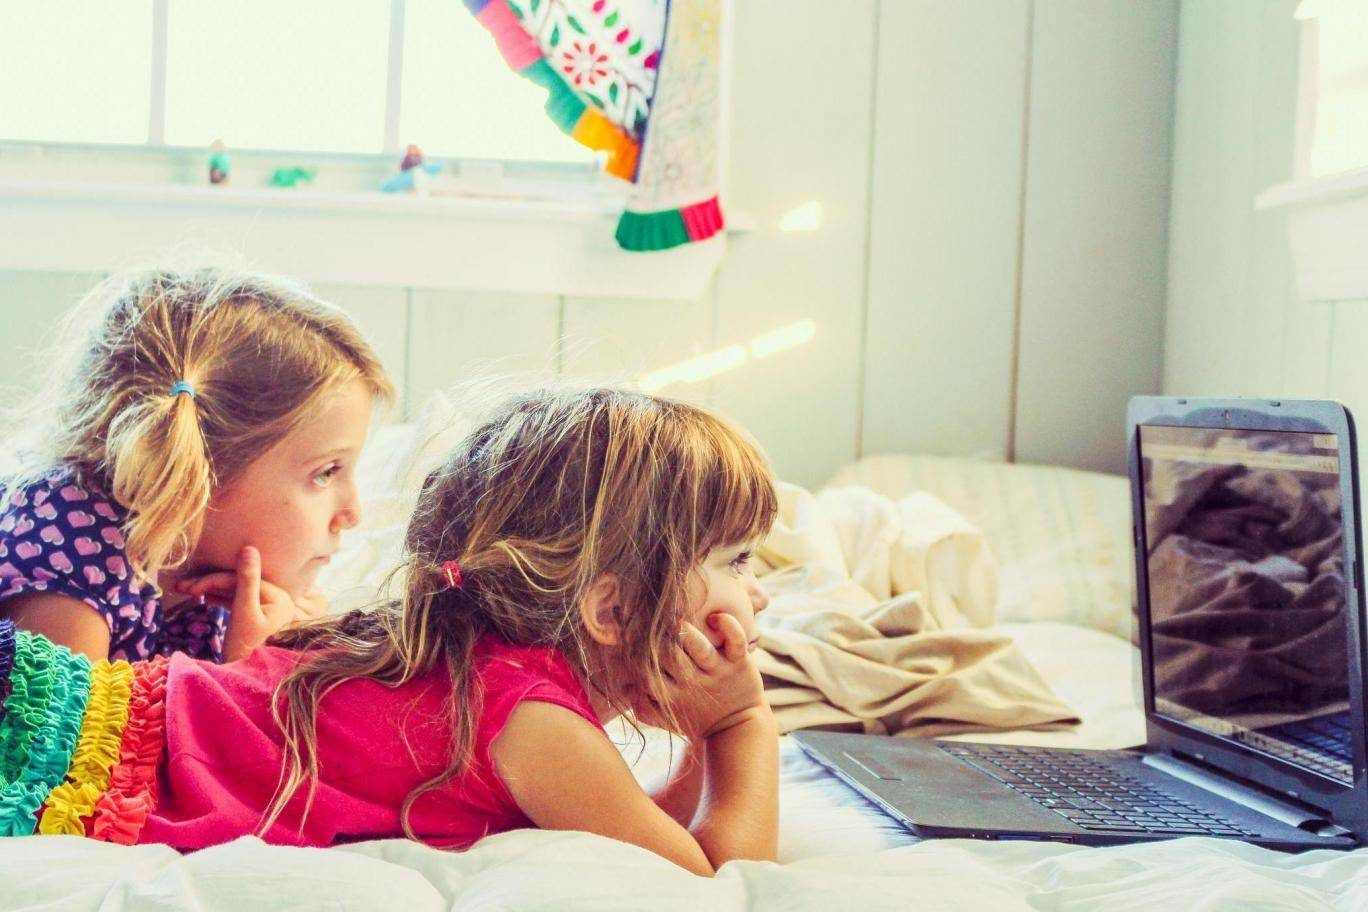 Parents should limit children's screentime to 90 mins a day to prevent obesity, says study